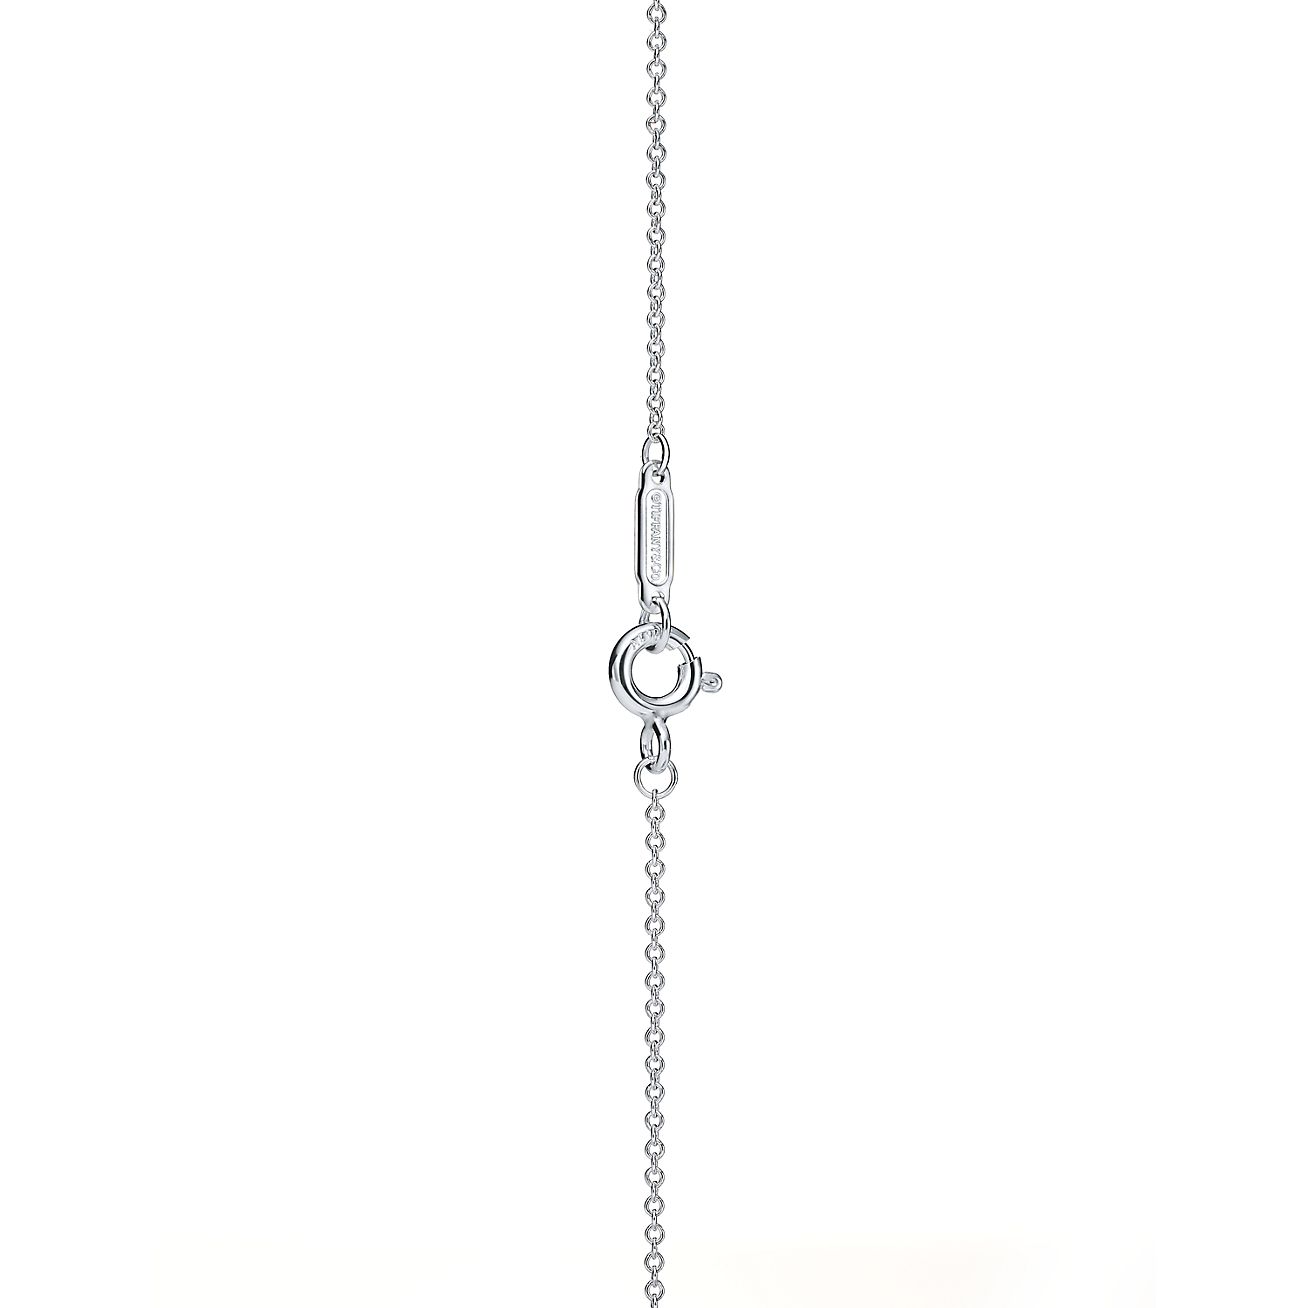 Tiffany & Co. Return To Tiffany Red Heart Tag Pendant Necklace